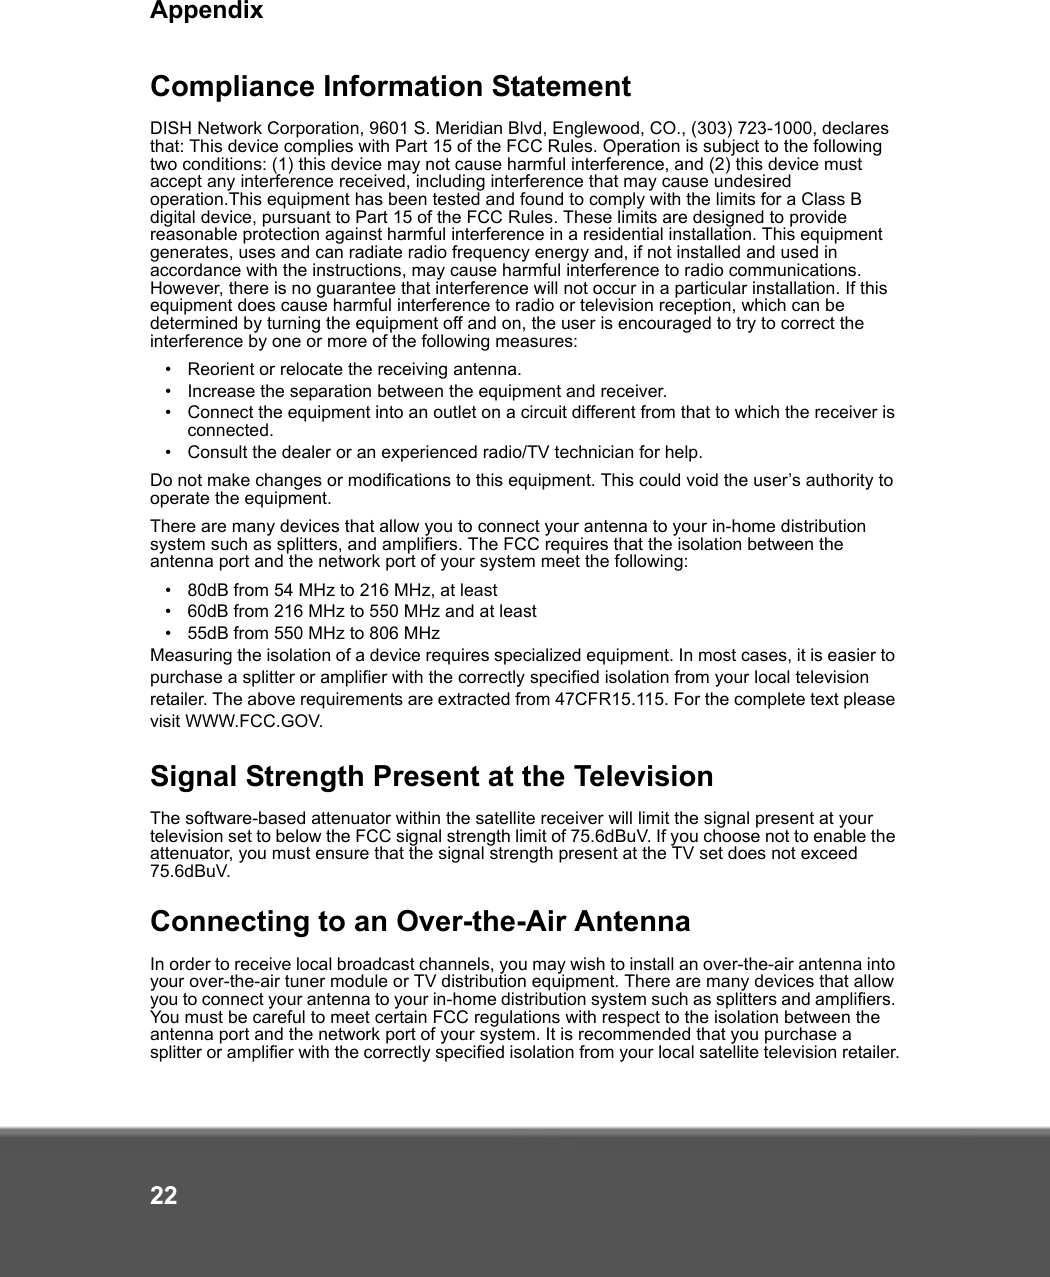 Appendix22Compliance Information StatementDISH Network Corporation, 9601 S. Meridian Blvd, Englewood, CO., (303) 723-1000, declares that: This device complies with Part 15 of the FCC Rules. Operation is subject to the following two conditions: (1) this device may not cause harmful interference, and (2) this device must accept any interference received, including interference that may cause undesired operation.This equipment has been tested and found to comply with the limits for a Class B digital device, pursuant to Part 15 of the FCC Rules. These limits are designed to provide reasonable protection against harmful interference in a residential installation. This equipment generates, uses and can radiate radio frequency energy and, if not installed and used in accordance with the instructions, may cause harmful interference to radio communications. However, there is no guarantee that interference will not occur in a particular installation. If this equipment does cause harmful interference to radio or television reception, which can be determined by turning the equipment off and on, the user is encouraged to try to correct the interference by one or more of the following measures:•Reorient or relocate the receiving antenna.•Increase the separation between the equipment and receiver.•Connect the equipment into an outlet on a circuit different from that to which the receiver is connected.•Consult the dealer or an experienced radio/TV technician for help.Do not make changes or modifications to this equipment. This could void the user’s authority to operate the equipment.There are many devices that allow you to connect your antenna to your in-home distribution system such as splitters, and amplifiers. The FCC requires that the isolation between the antenna port and the network port of your system meet the following:•80dB from 54 MHz to 216 MHz, at least•60dB from 216 MHz to 550 MHz and at least•55dB from 550 MHz to 806 MHzMeasuring the isolation of a device requires specialized equipment. In most cases, it is easier to purchase a splitter or amplifier with the correctly specified isolation from your local television retailer. The above requirements are extracted from 47CFR15.115. For the complete text please visit WWW.FCC.GOV.Signal Strength Present at the TelevisionThe software-based attenuator within the satellite receiver will limit the signal present at your television set to below the FCC signal strength limit of 75.6dBuV. If you choose not to enable the attenuator, you must ensure that the signal strength present at the TV set does not exceed 75.6dBuV. Connecting to an Over-the-Air AntennaIn order to receive local broadcast channels, you may wish to install an over-the-air antenna into your over-the-air tuner module or TV distribution equipment. There are many devices that allow you to connect your antenna to your in-home distribution system such as splitters and amplifiers. You must be careful to meet certain FCC regulations with respect to the isolation between the antenna port and the network port of your system. It is recommended that you purchase a splitter or amplifier with the correctly specified isolation from your local satellite television retailer.